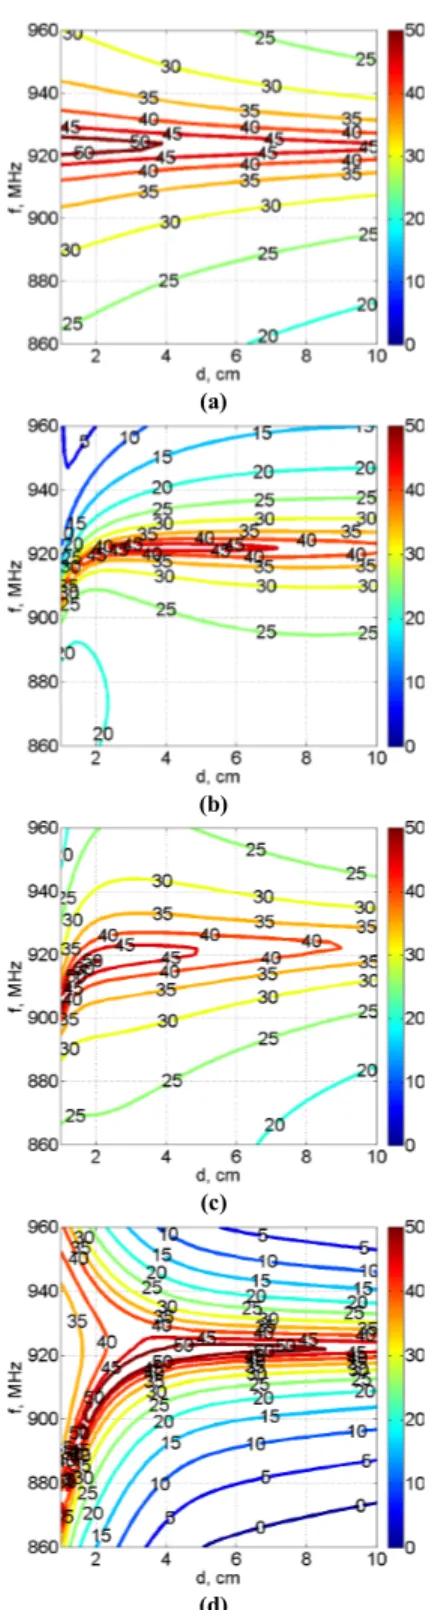 Fig.  3.8  -  Contour  plot  of  the  mutual  impedance  Z 21   versus  distance  and  frequency  for  the  NF-UHF  RFID  system configurations: (a) Loop/UH113, (b) Patch/UH113, (c) Slot/UH113 and (d) UH113/UH113